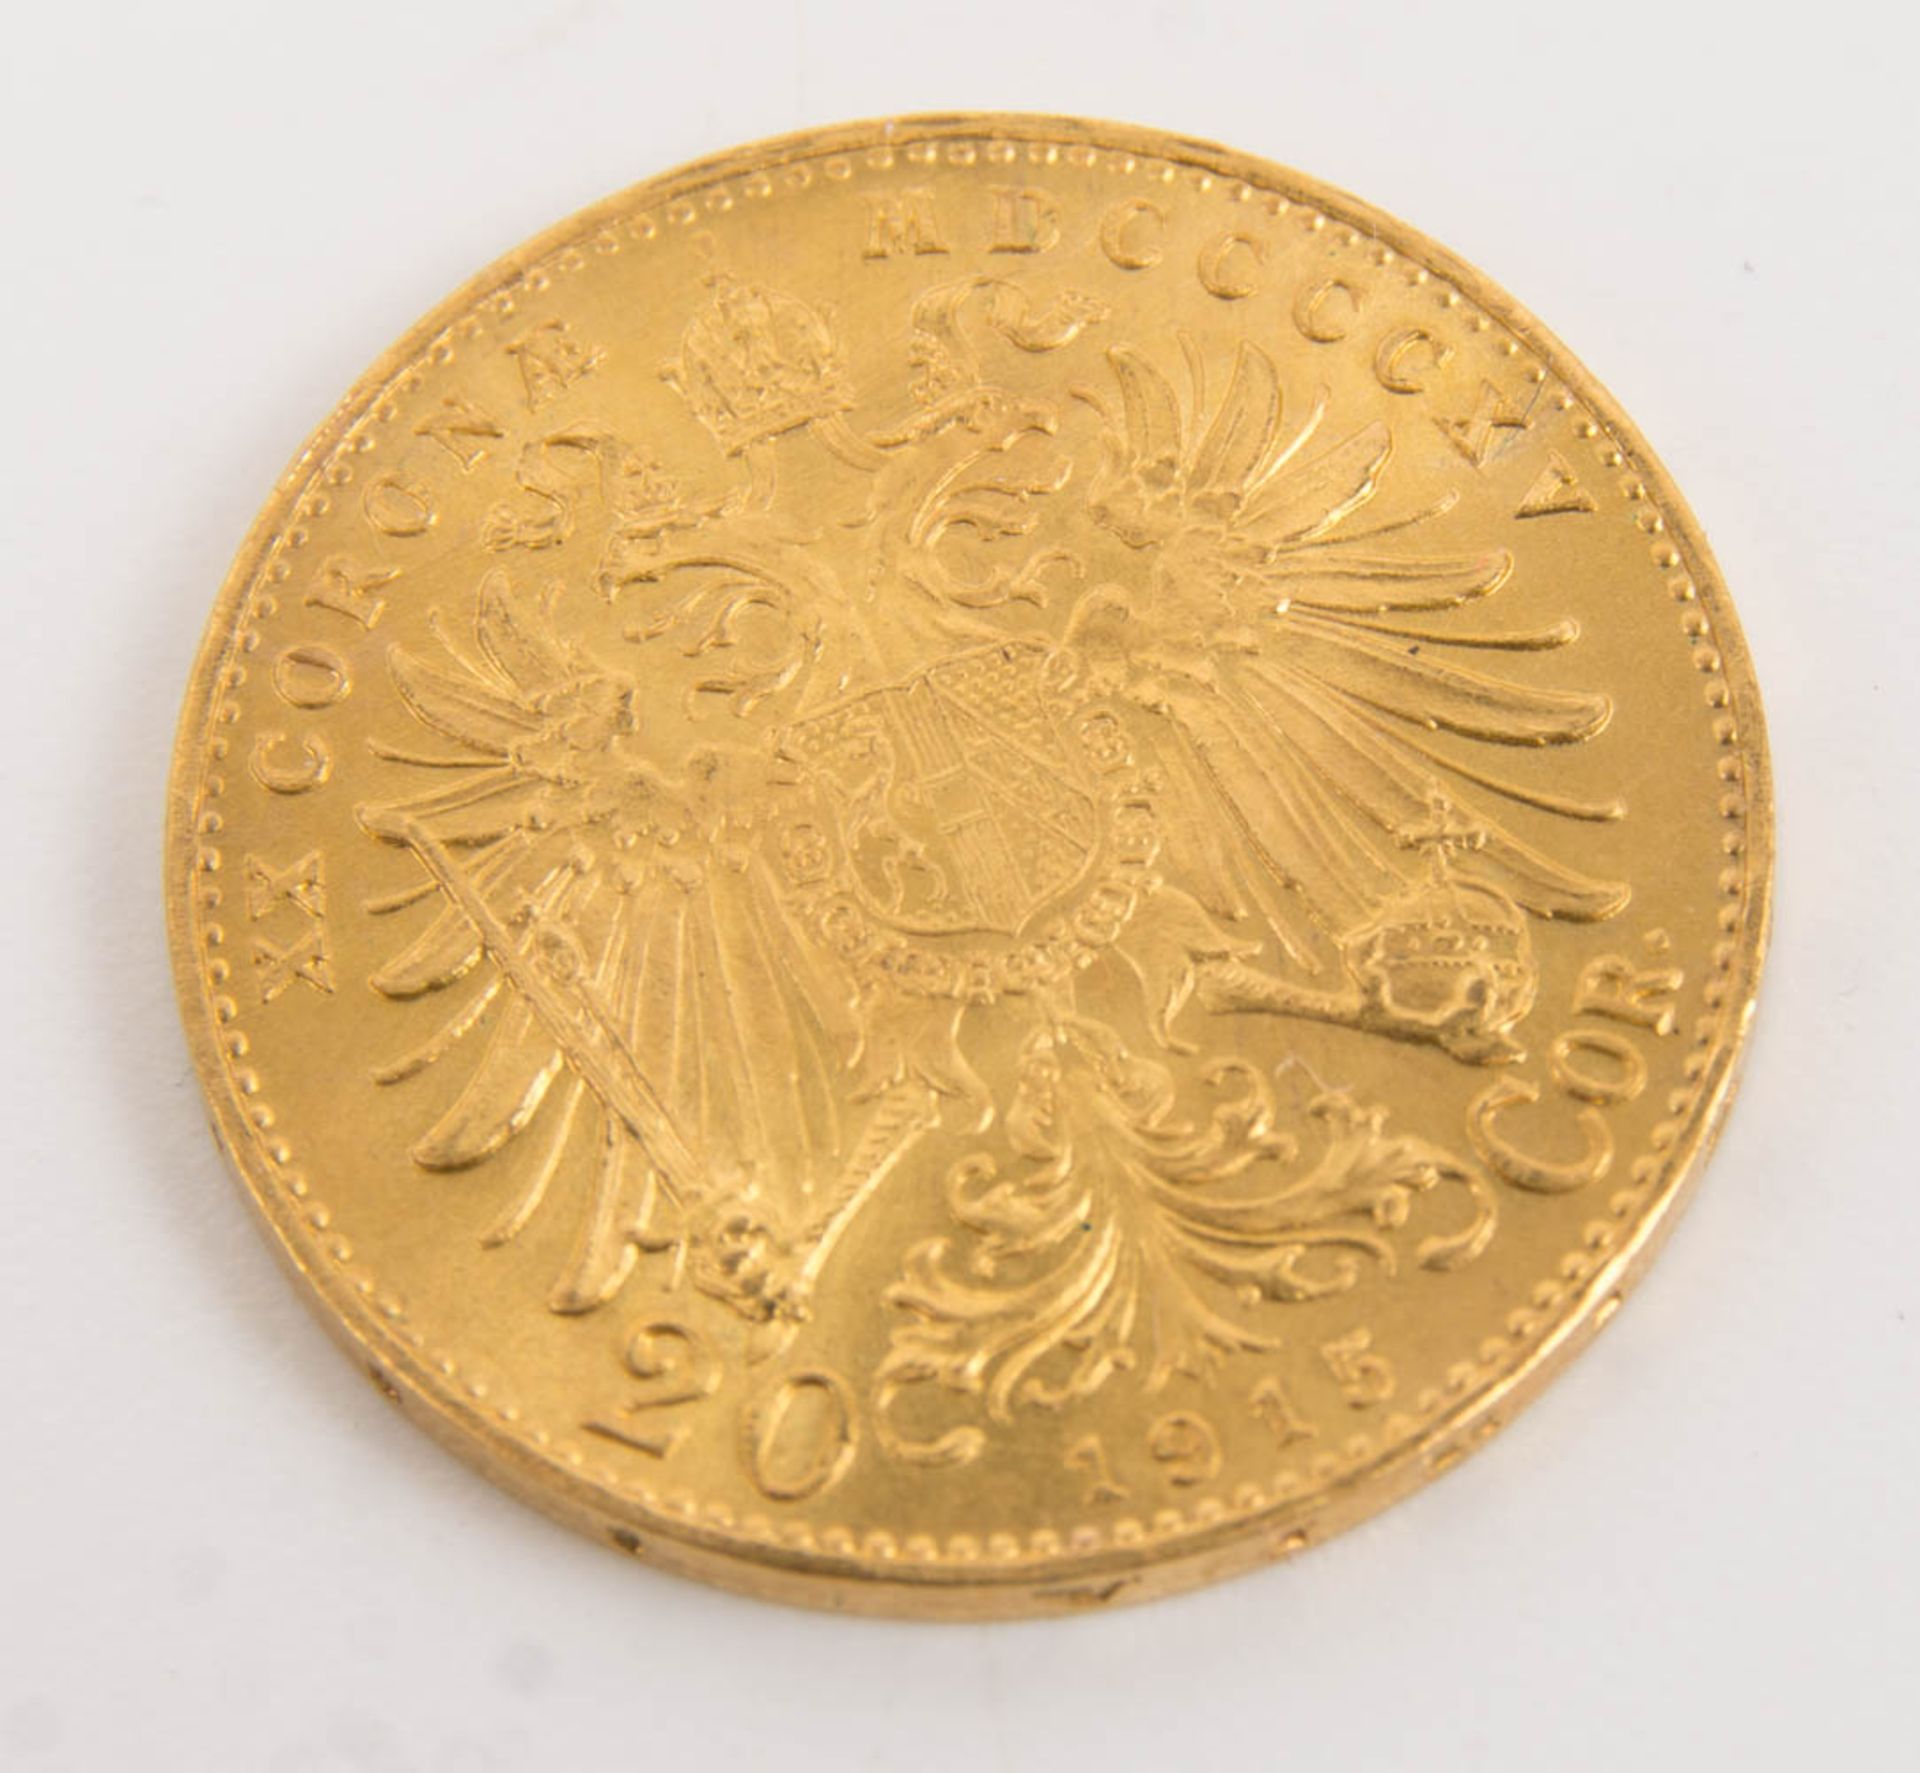 2 gold coins 20 crowns, restrike 1915. - Image 5 of 7